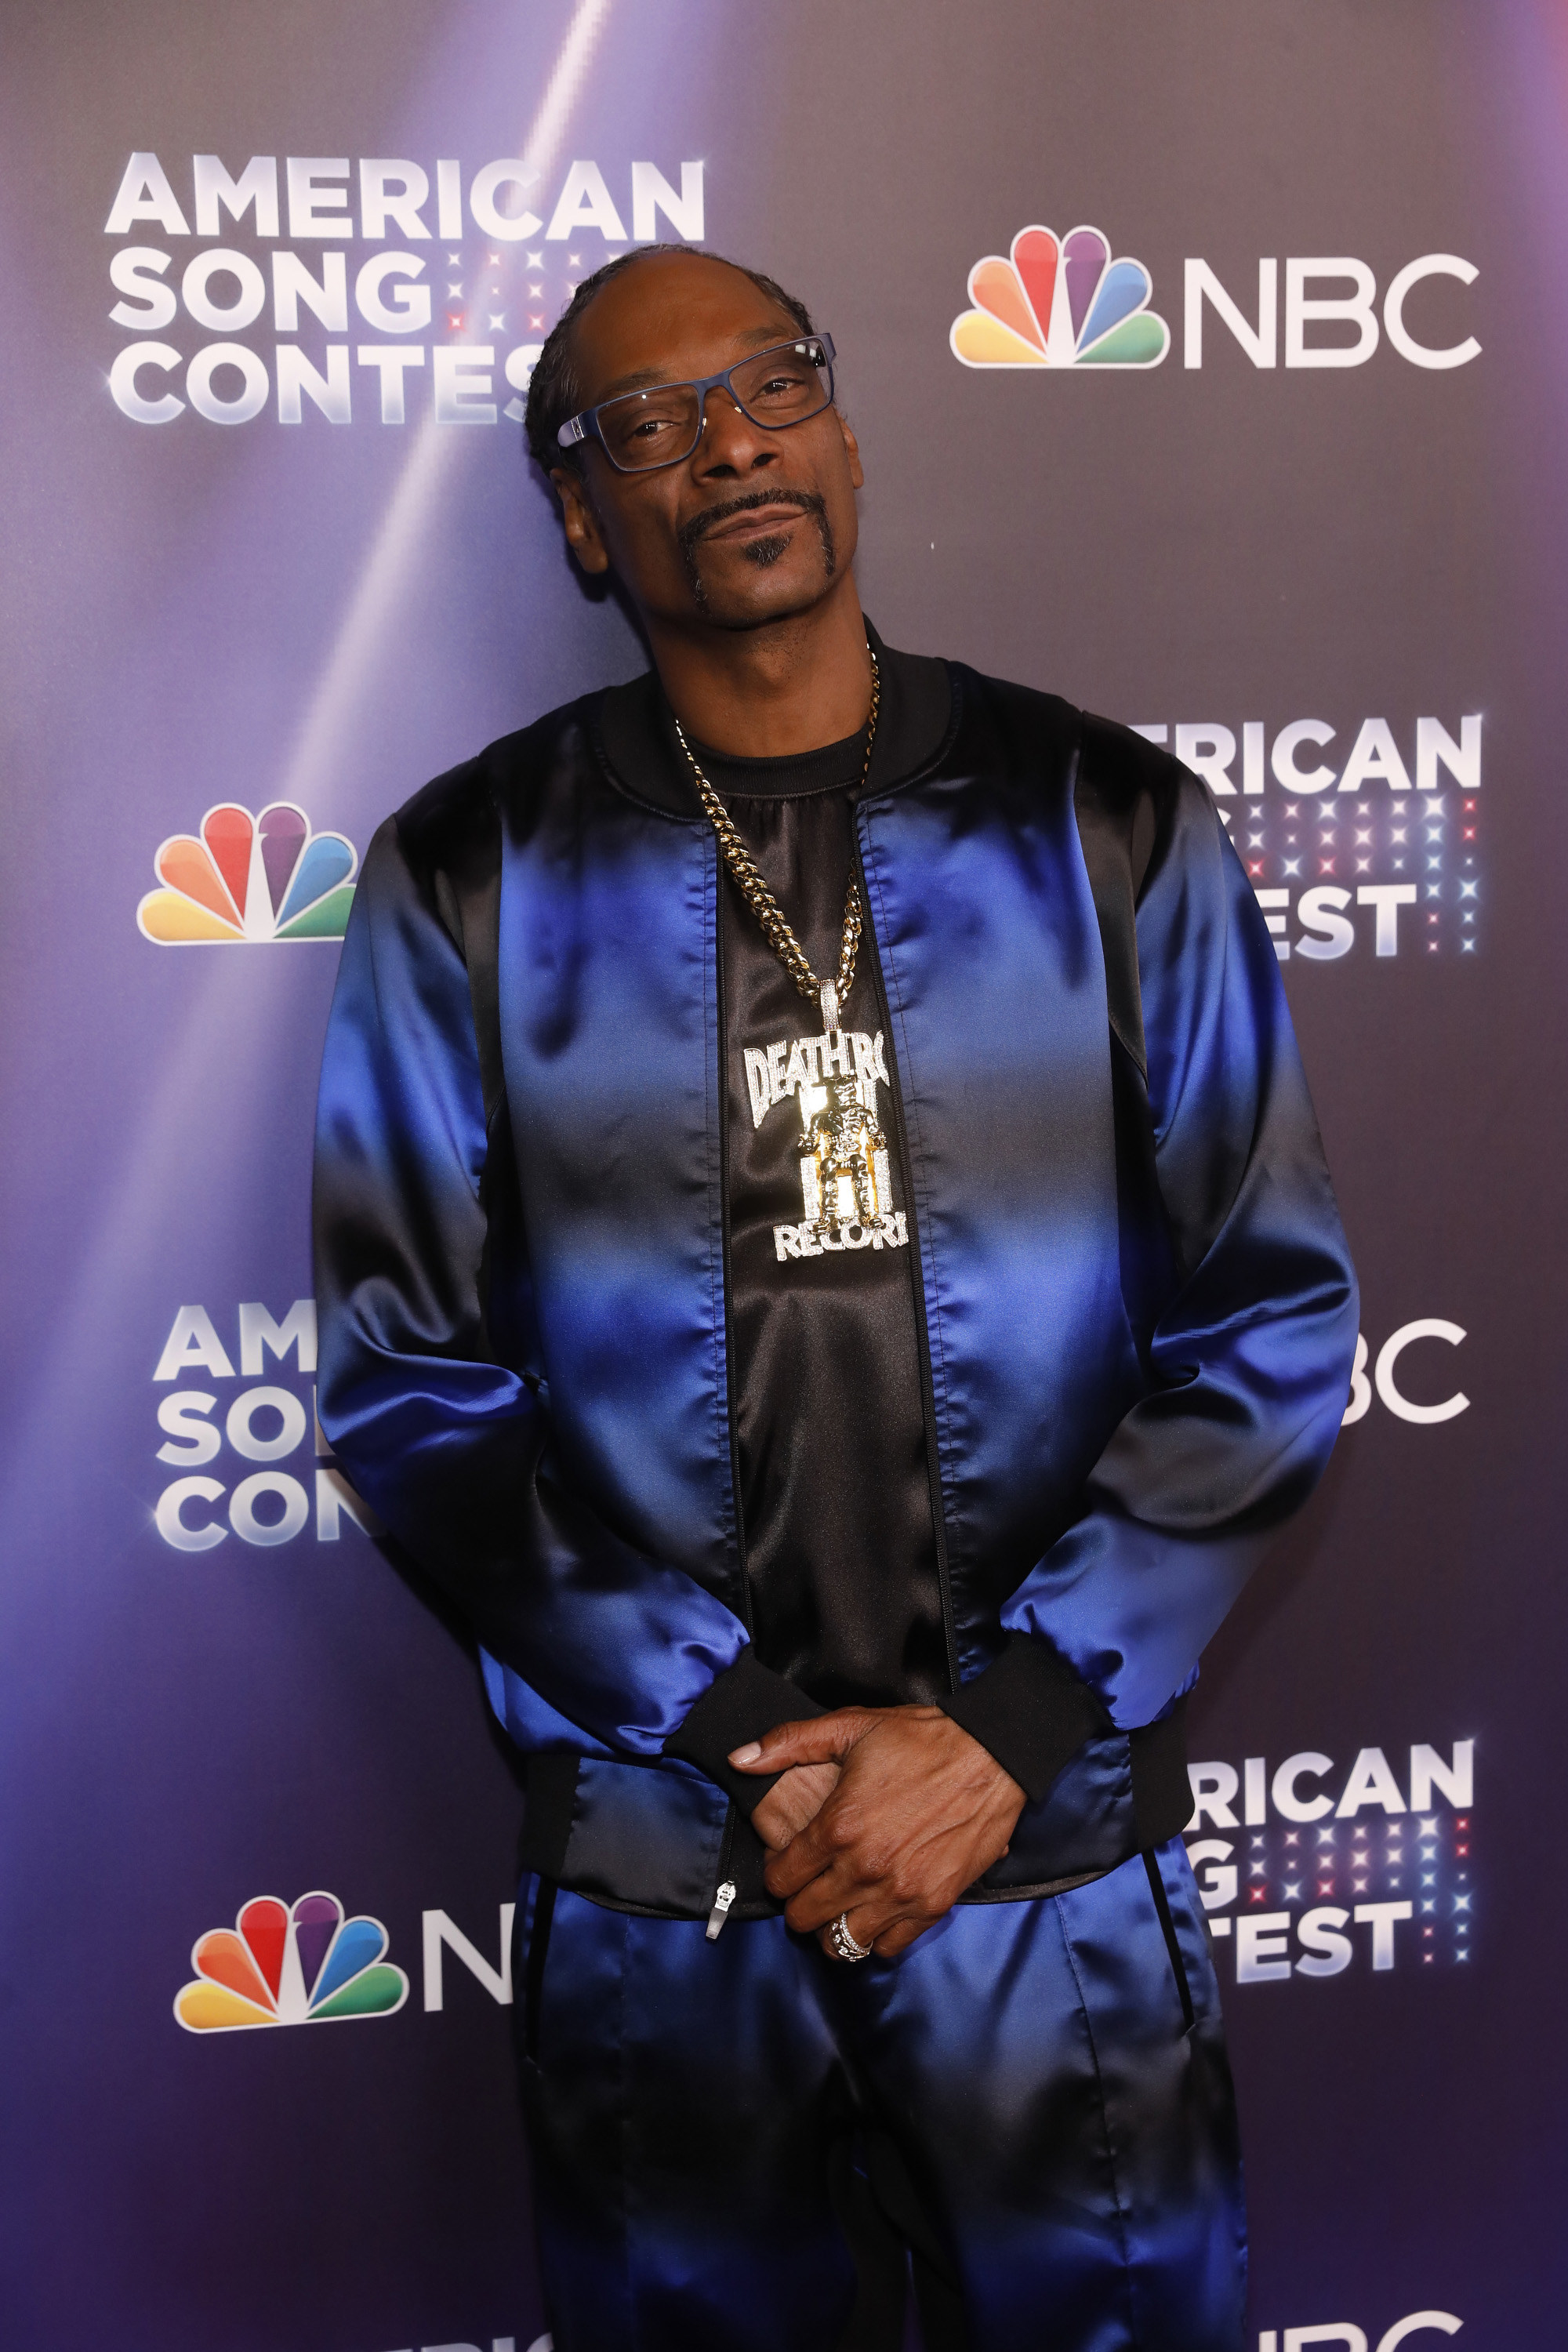 Snoop at an event